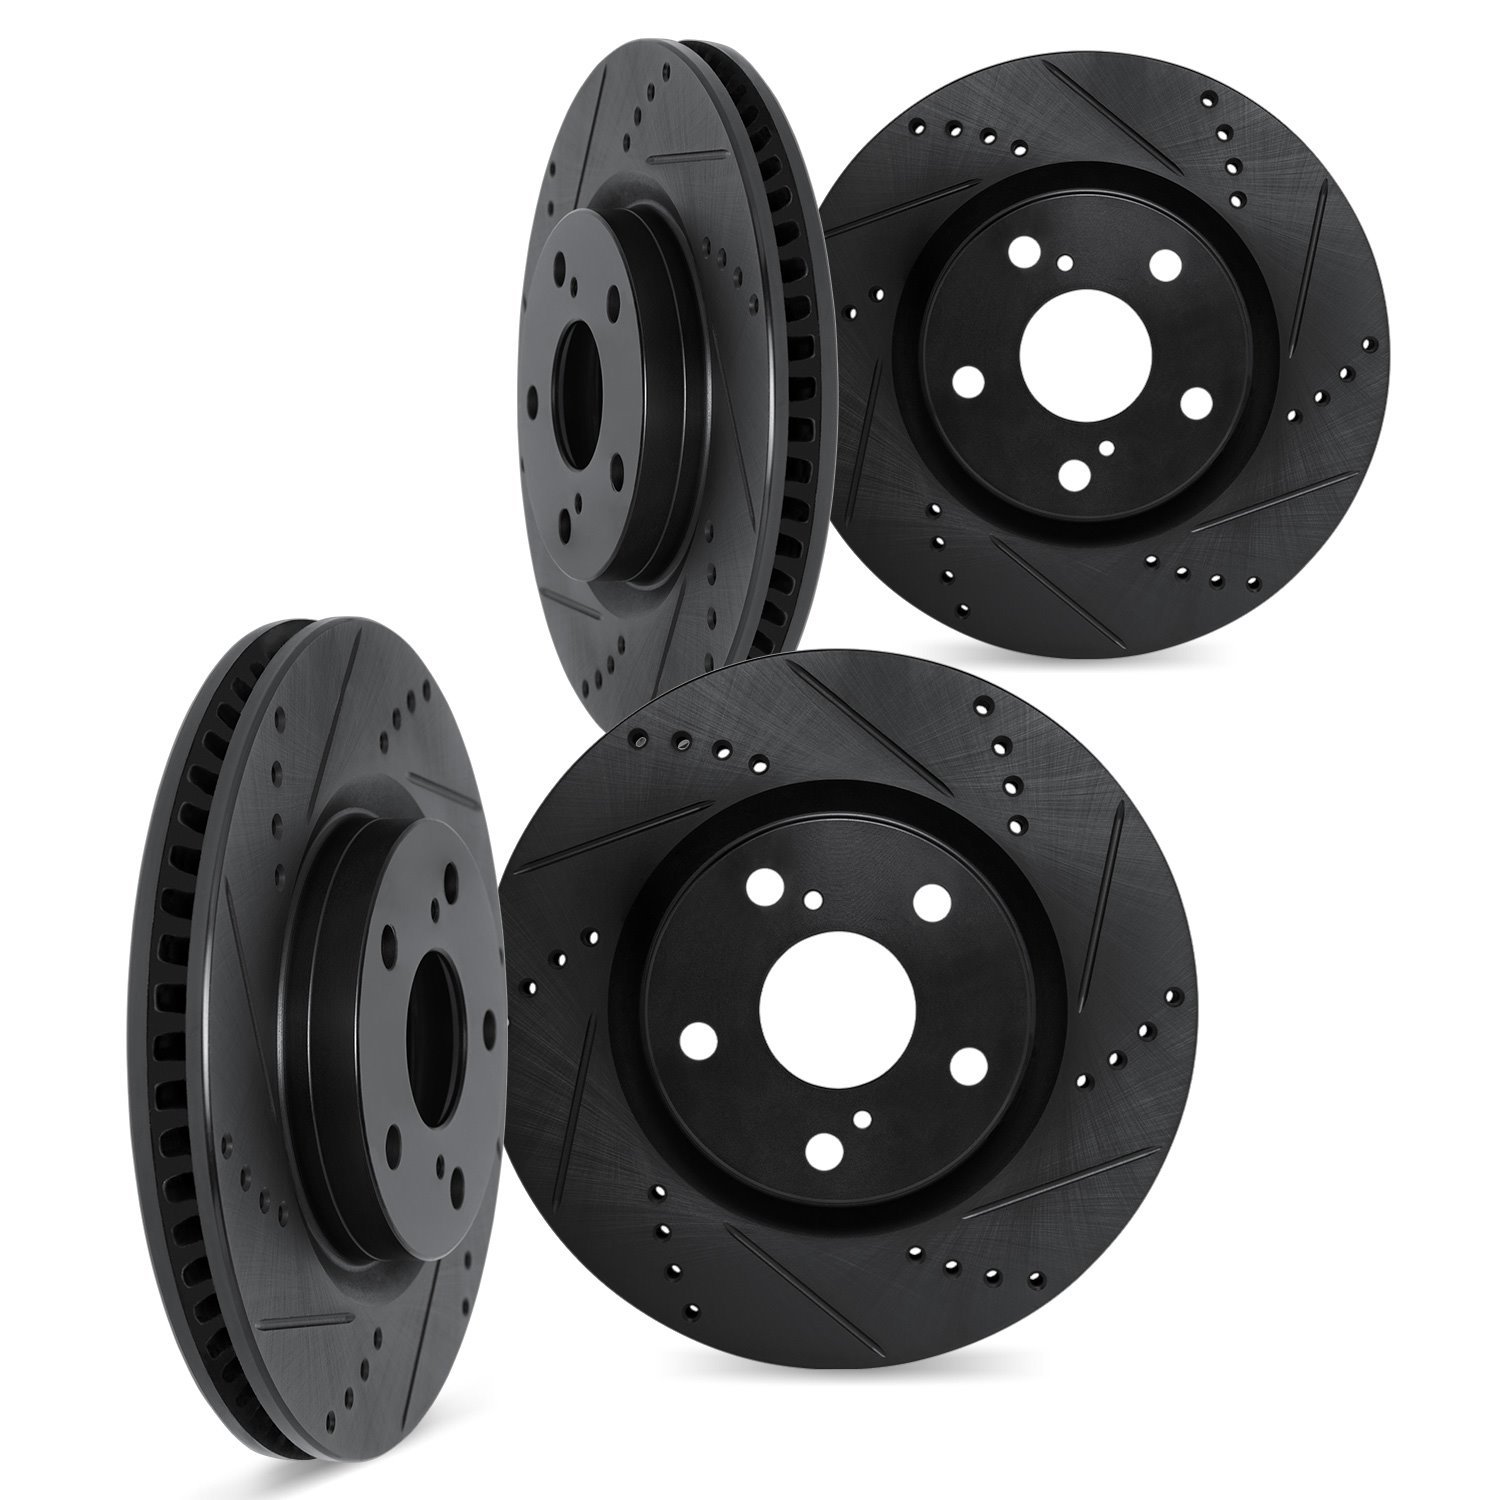 8004-67001 Drilled/Slotted Brake Rotors [Black], Fits Select Infiniti/Nissan, Position: Front and Rear